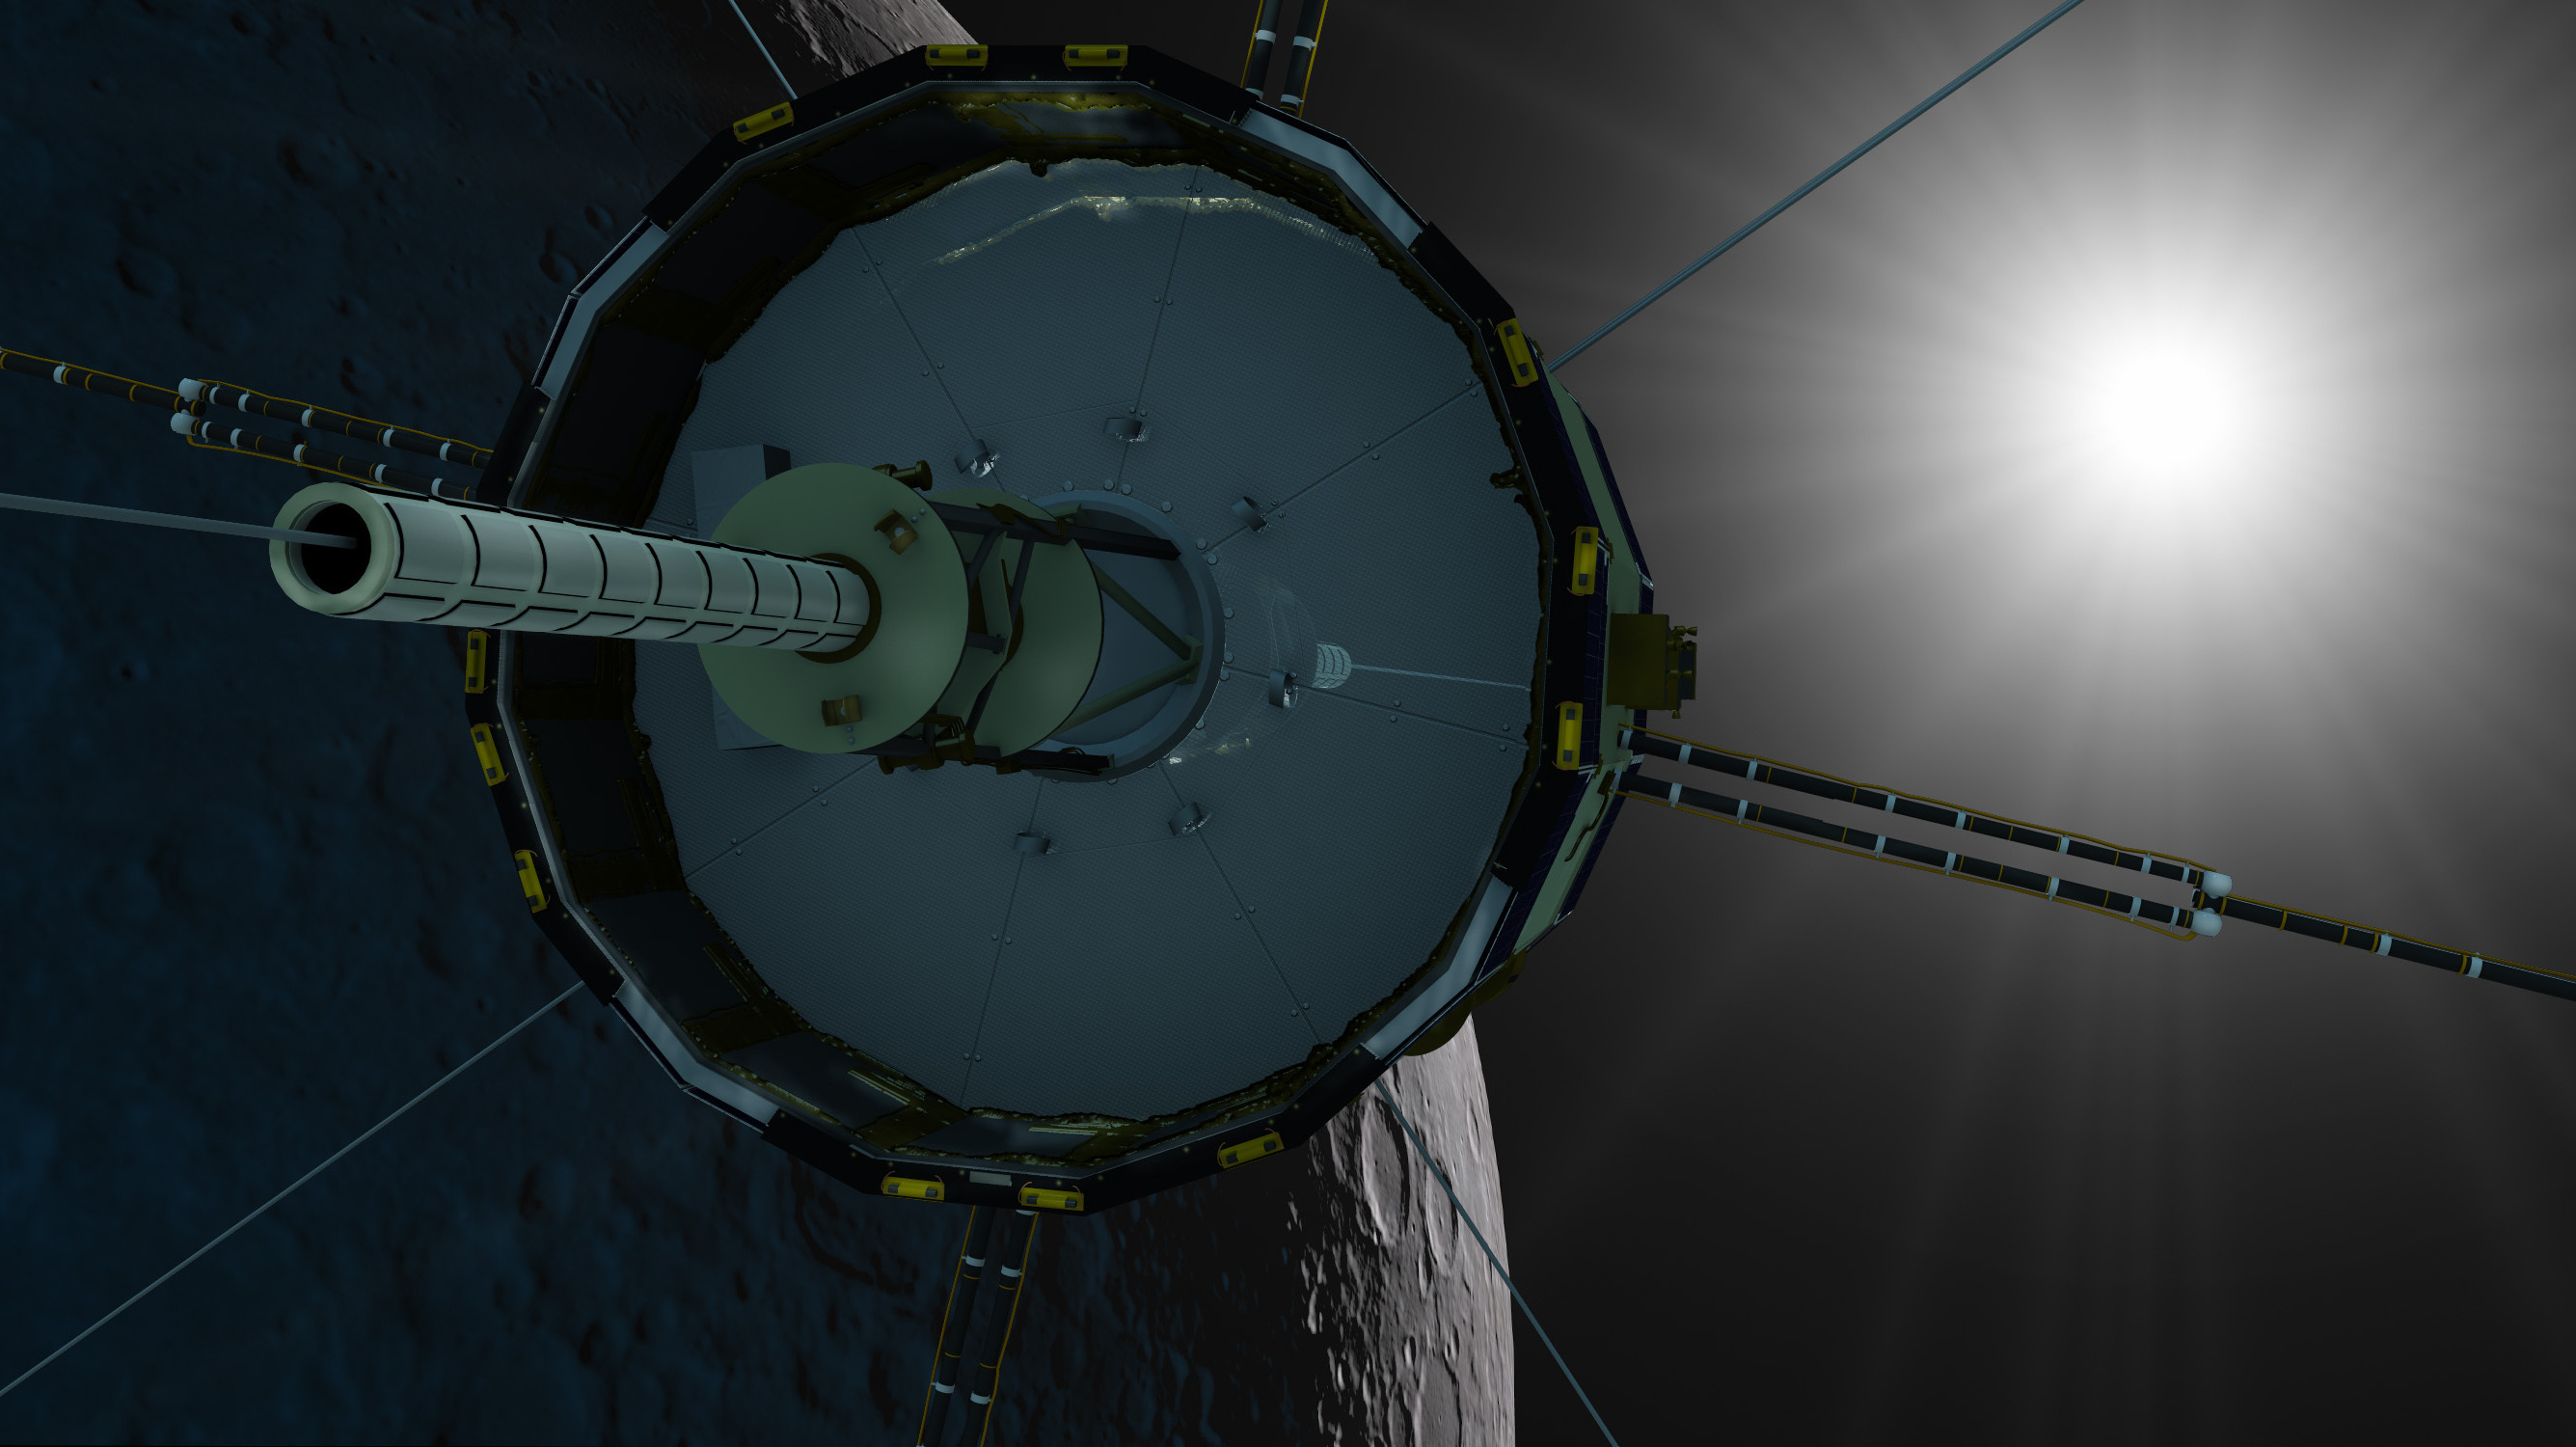 From the ISEE-3 Reboot Project: "An artist's rendering depicts the satellite ISEE-3/ICE during its planned lunar fly-by in August 2014." Image Credit: Mark Maxwell/ISEE-3 Reboot Project